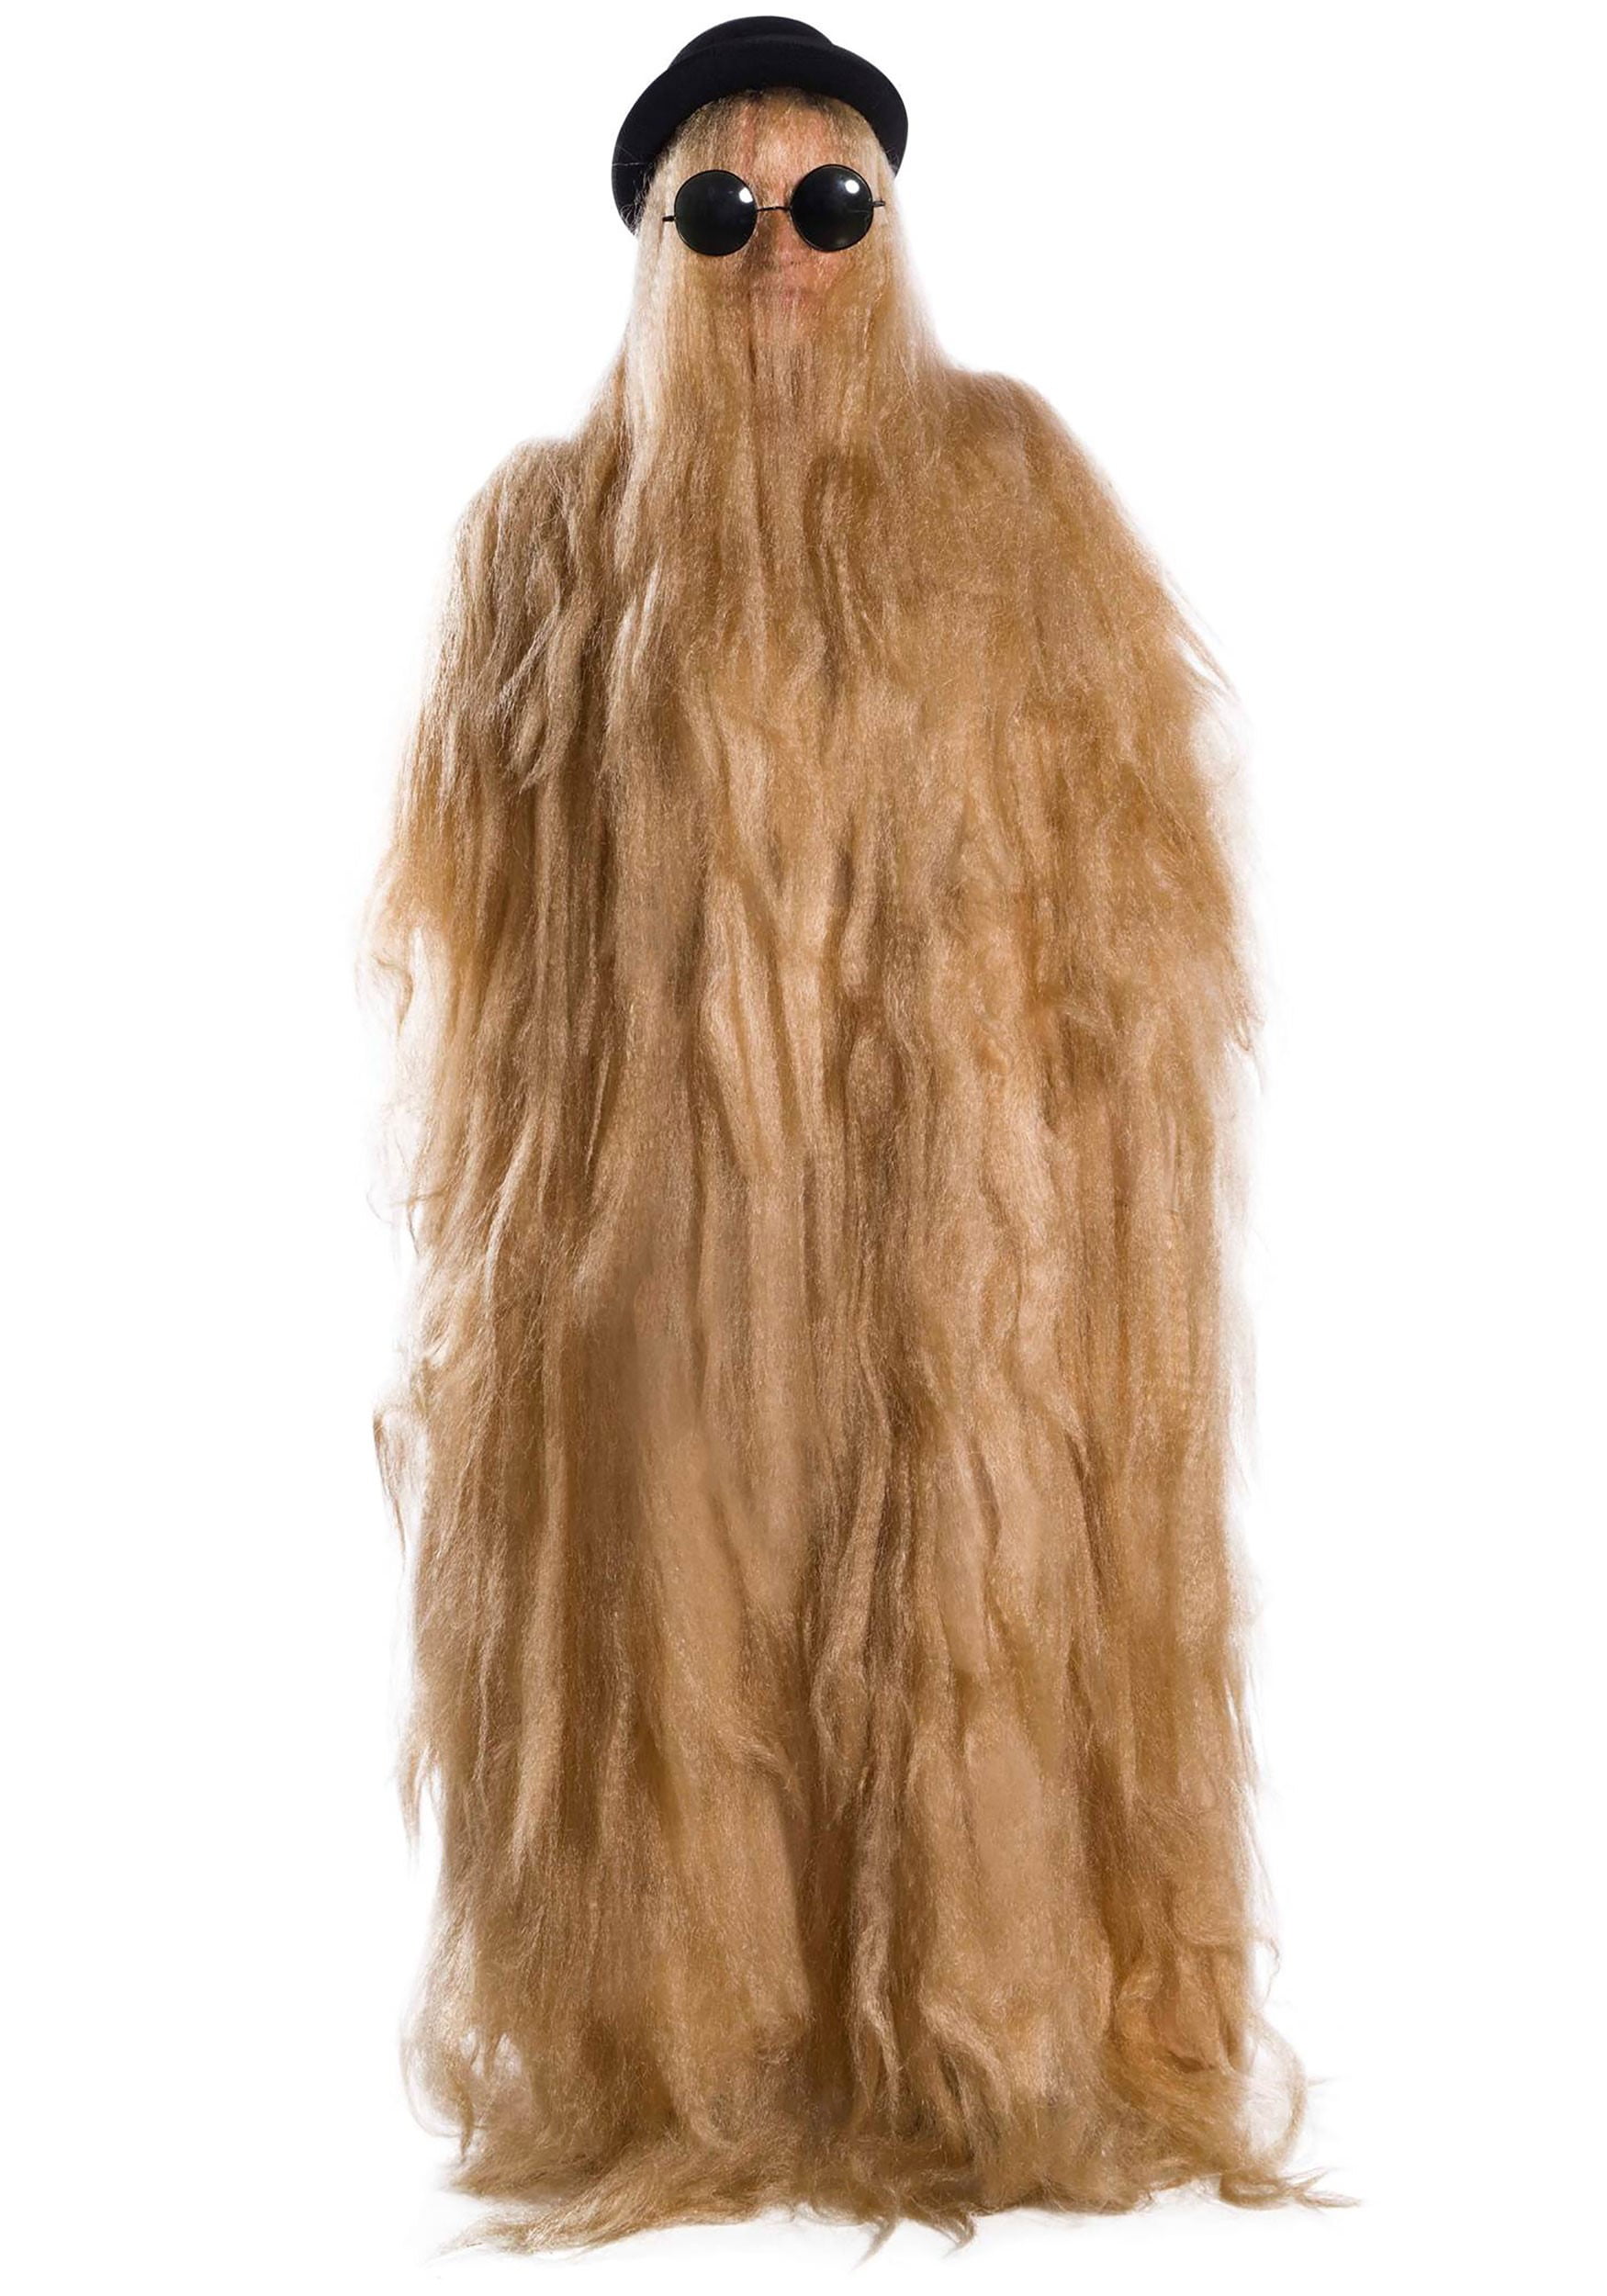 Addams Family Cousin Itt Costume for Adults 